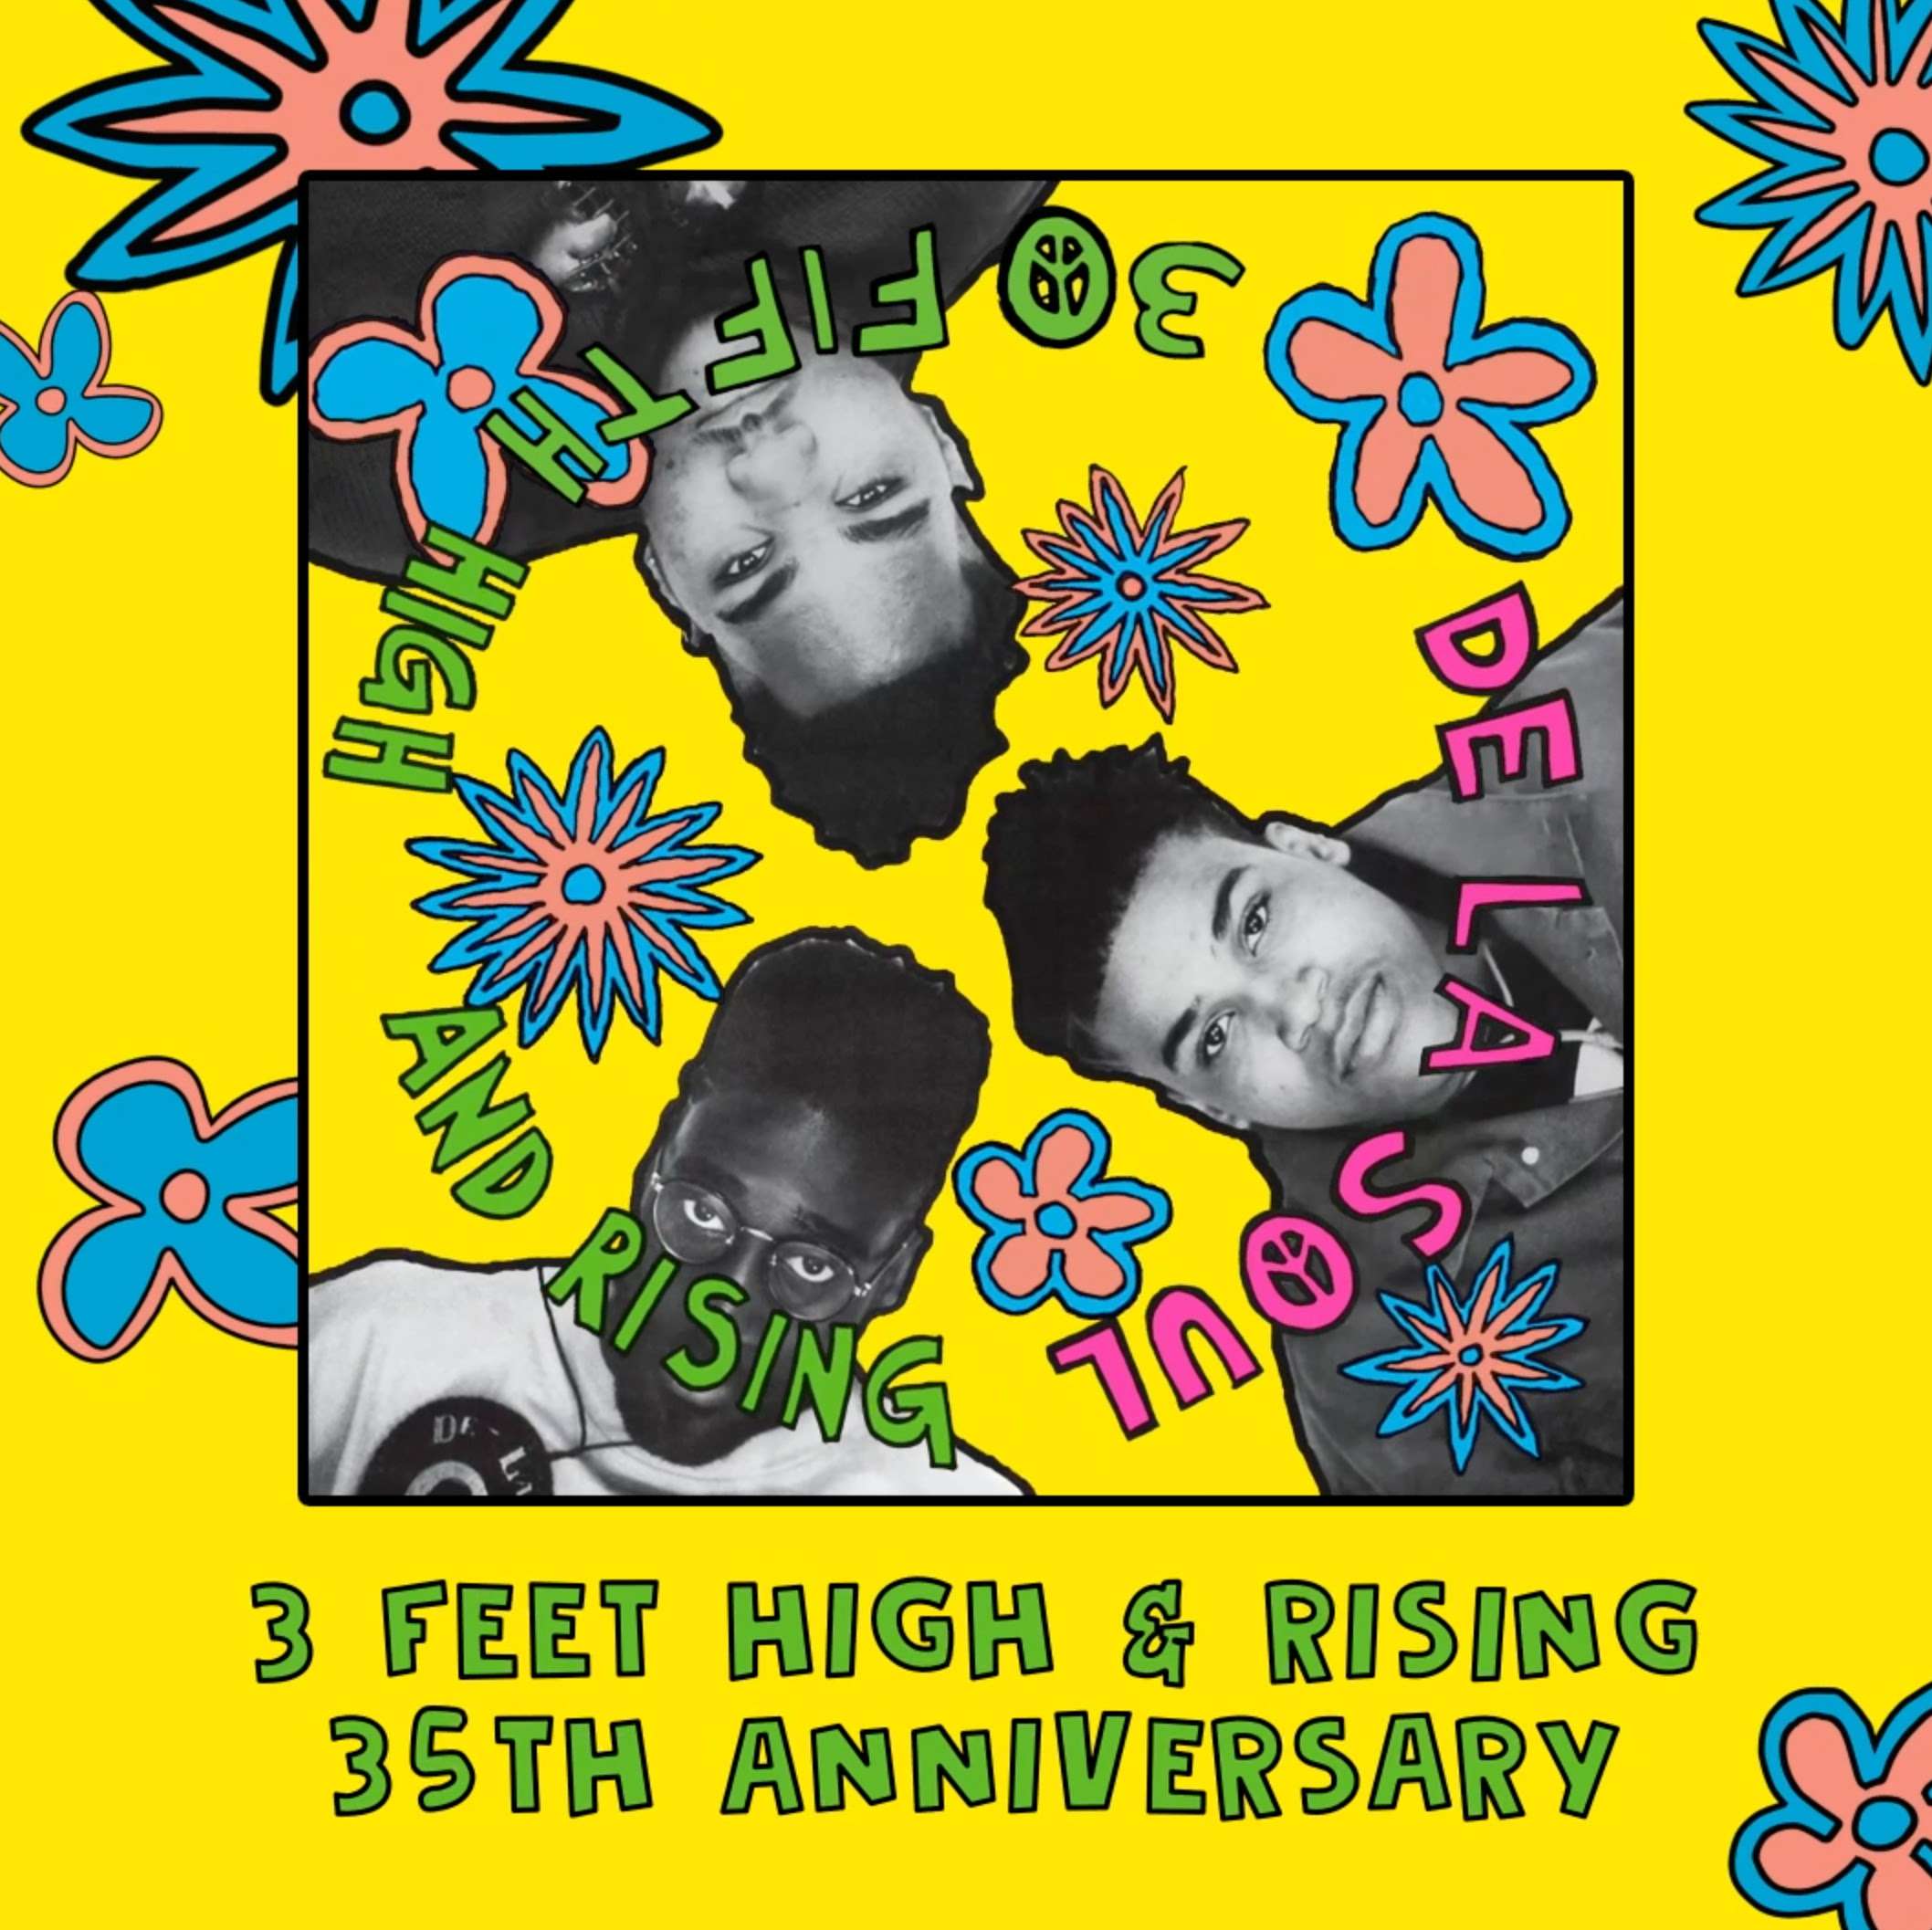 35th Anniversary Release Of “3 Feet High and Rising” By De La Soul